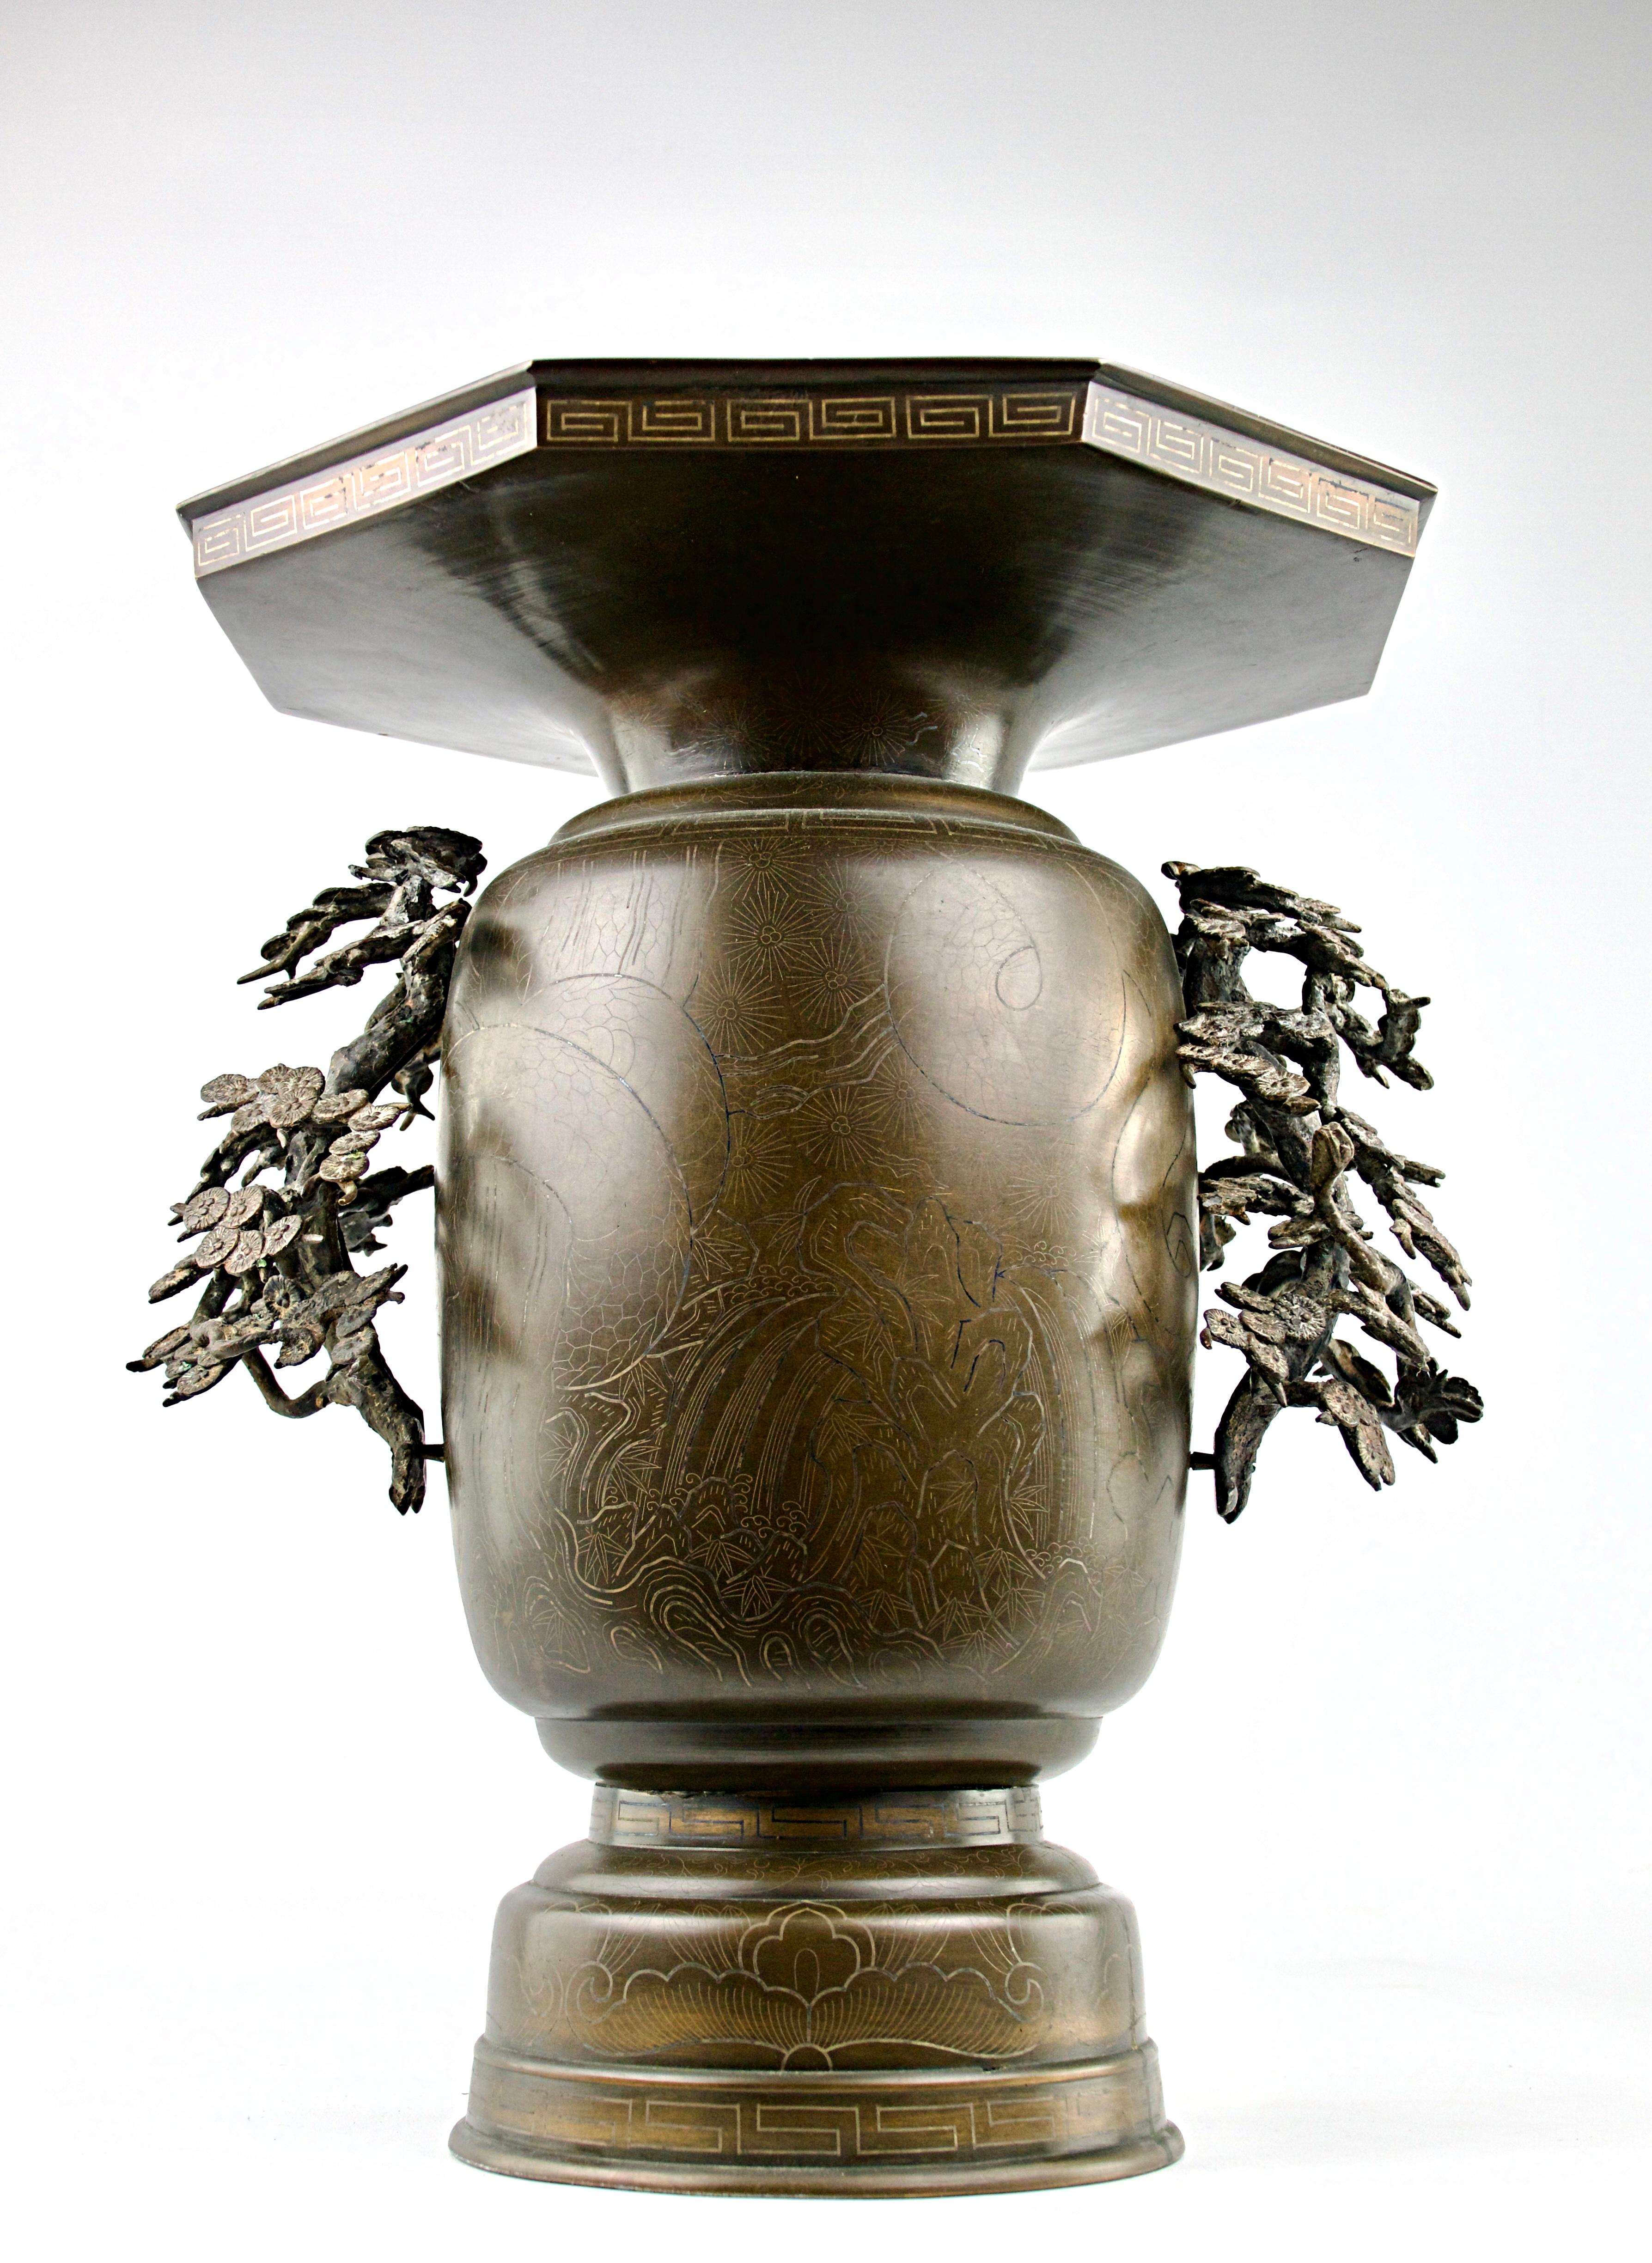 Beautiful and rare Japanese vase from the 19th century. Superb silver inlay work showcasing a Samuraï fighting off a serpentine dragon with an additional dragon on top of the lid. Additional detailed decorations of chrysanthemums and lily